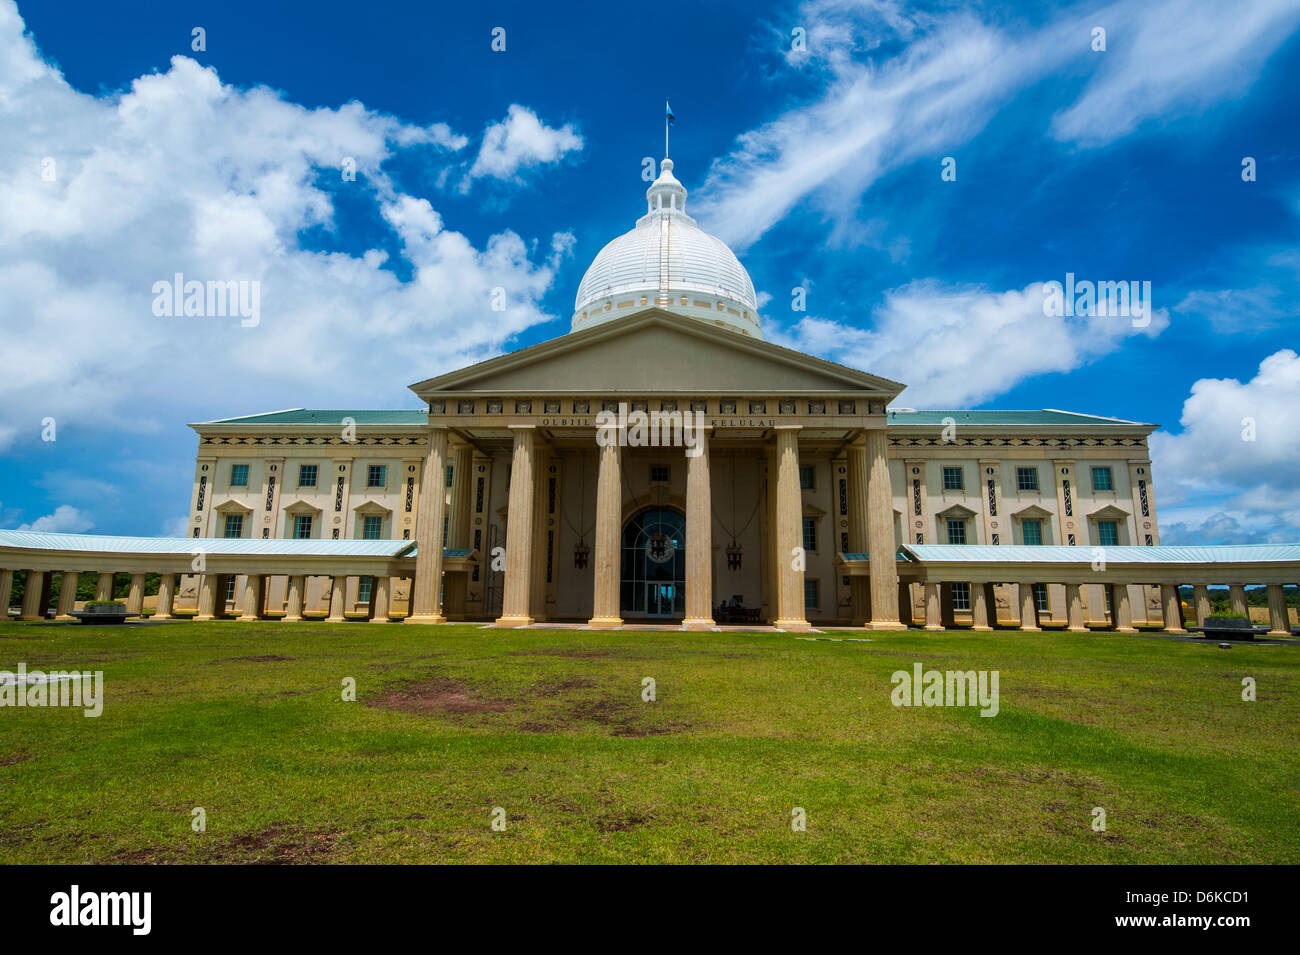 Parliament building of Palau on the Island of Babeldoab, Palau, Central Pacific, Pacific Stock Photo